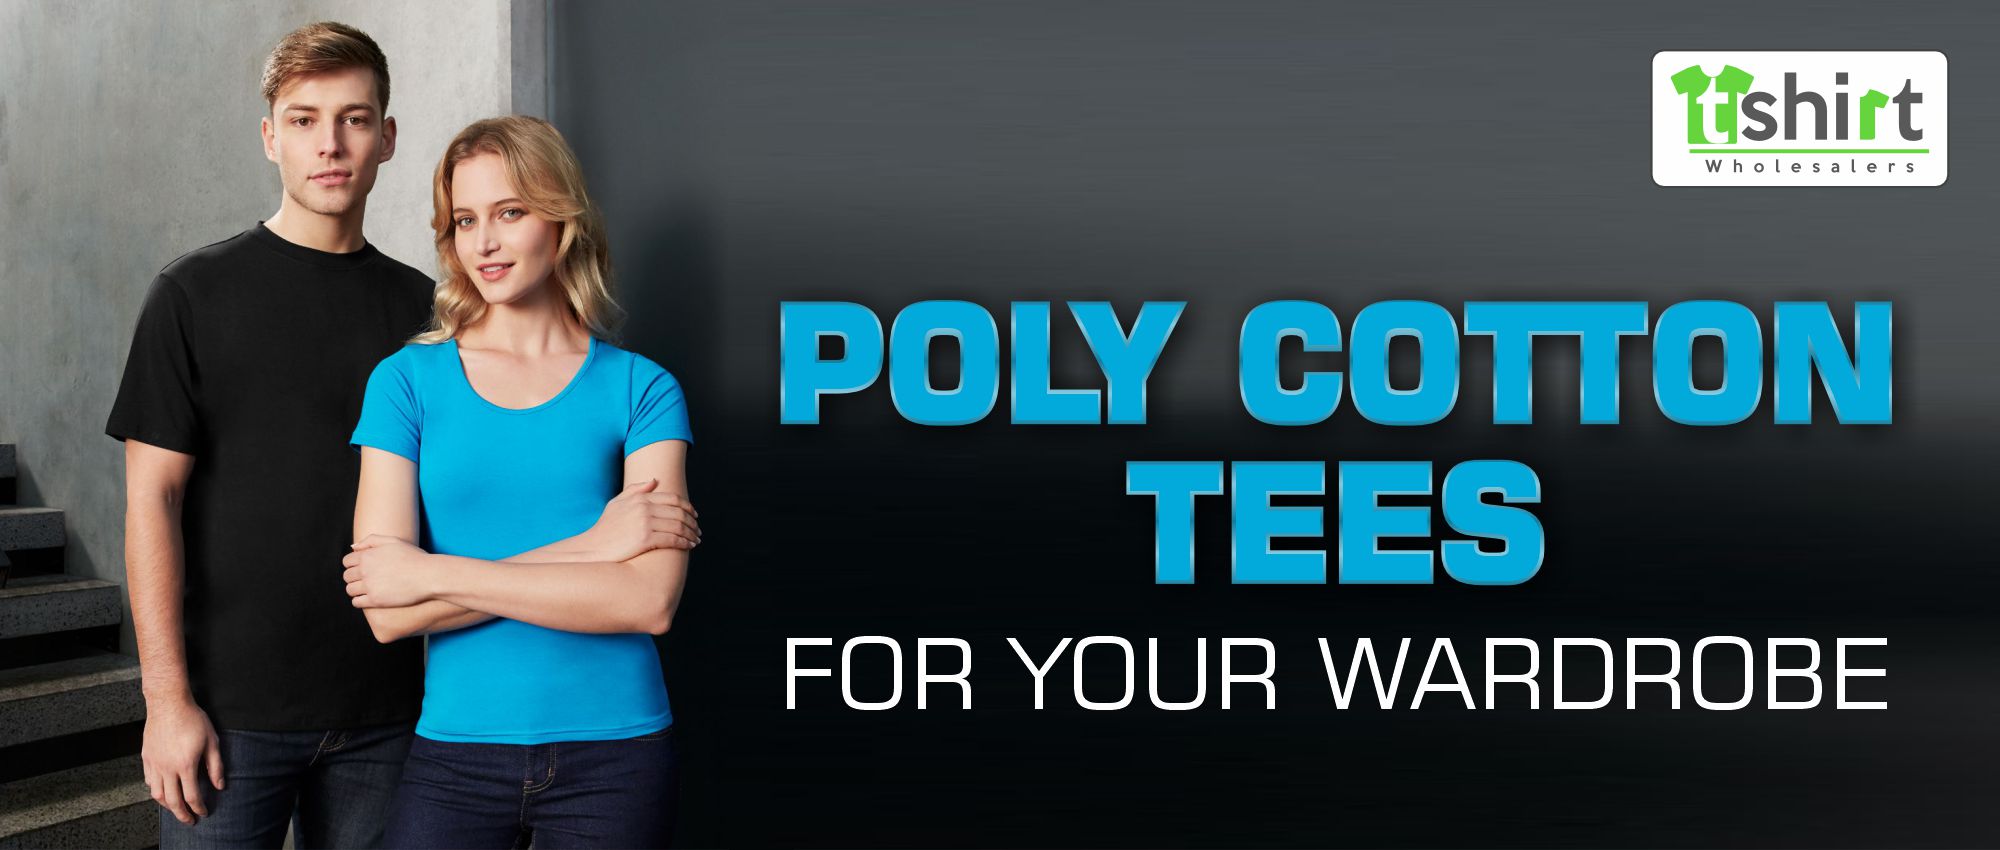 POLY COTTON TEES FOR YOUR WARDROBE